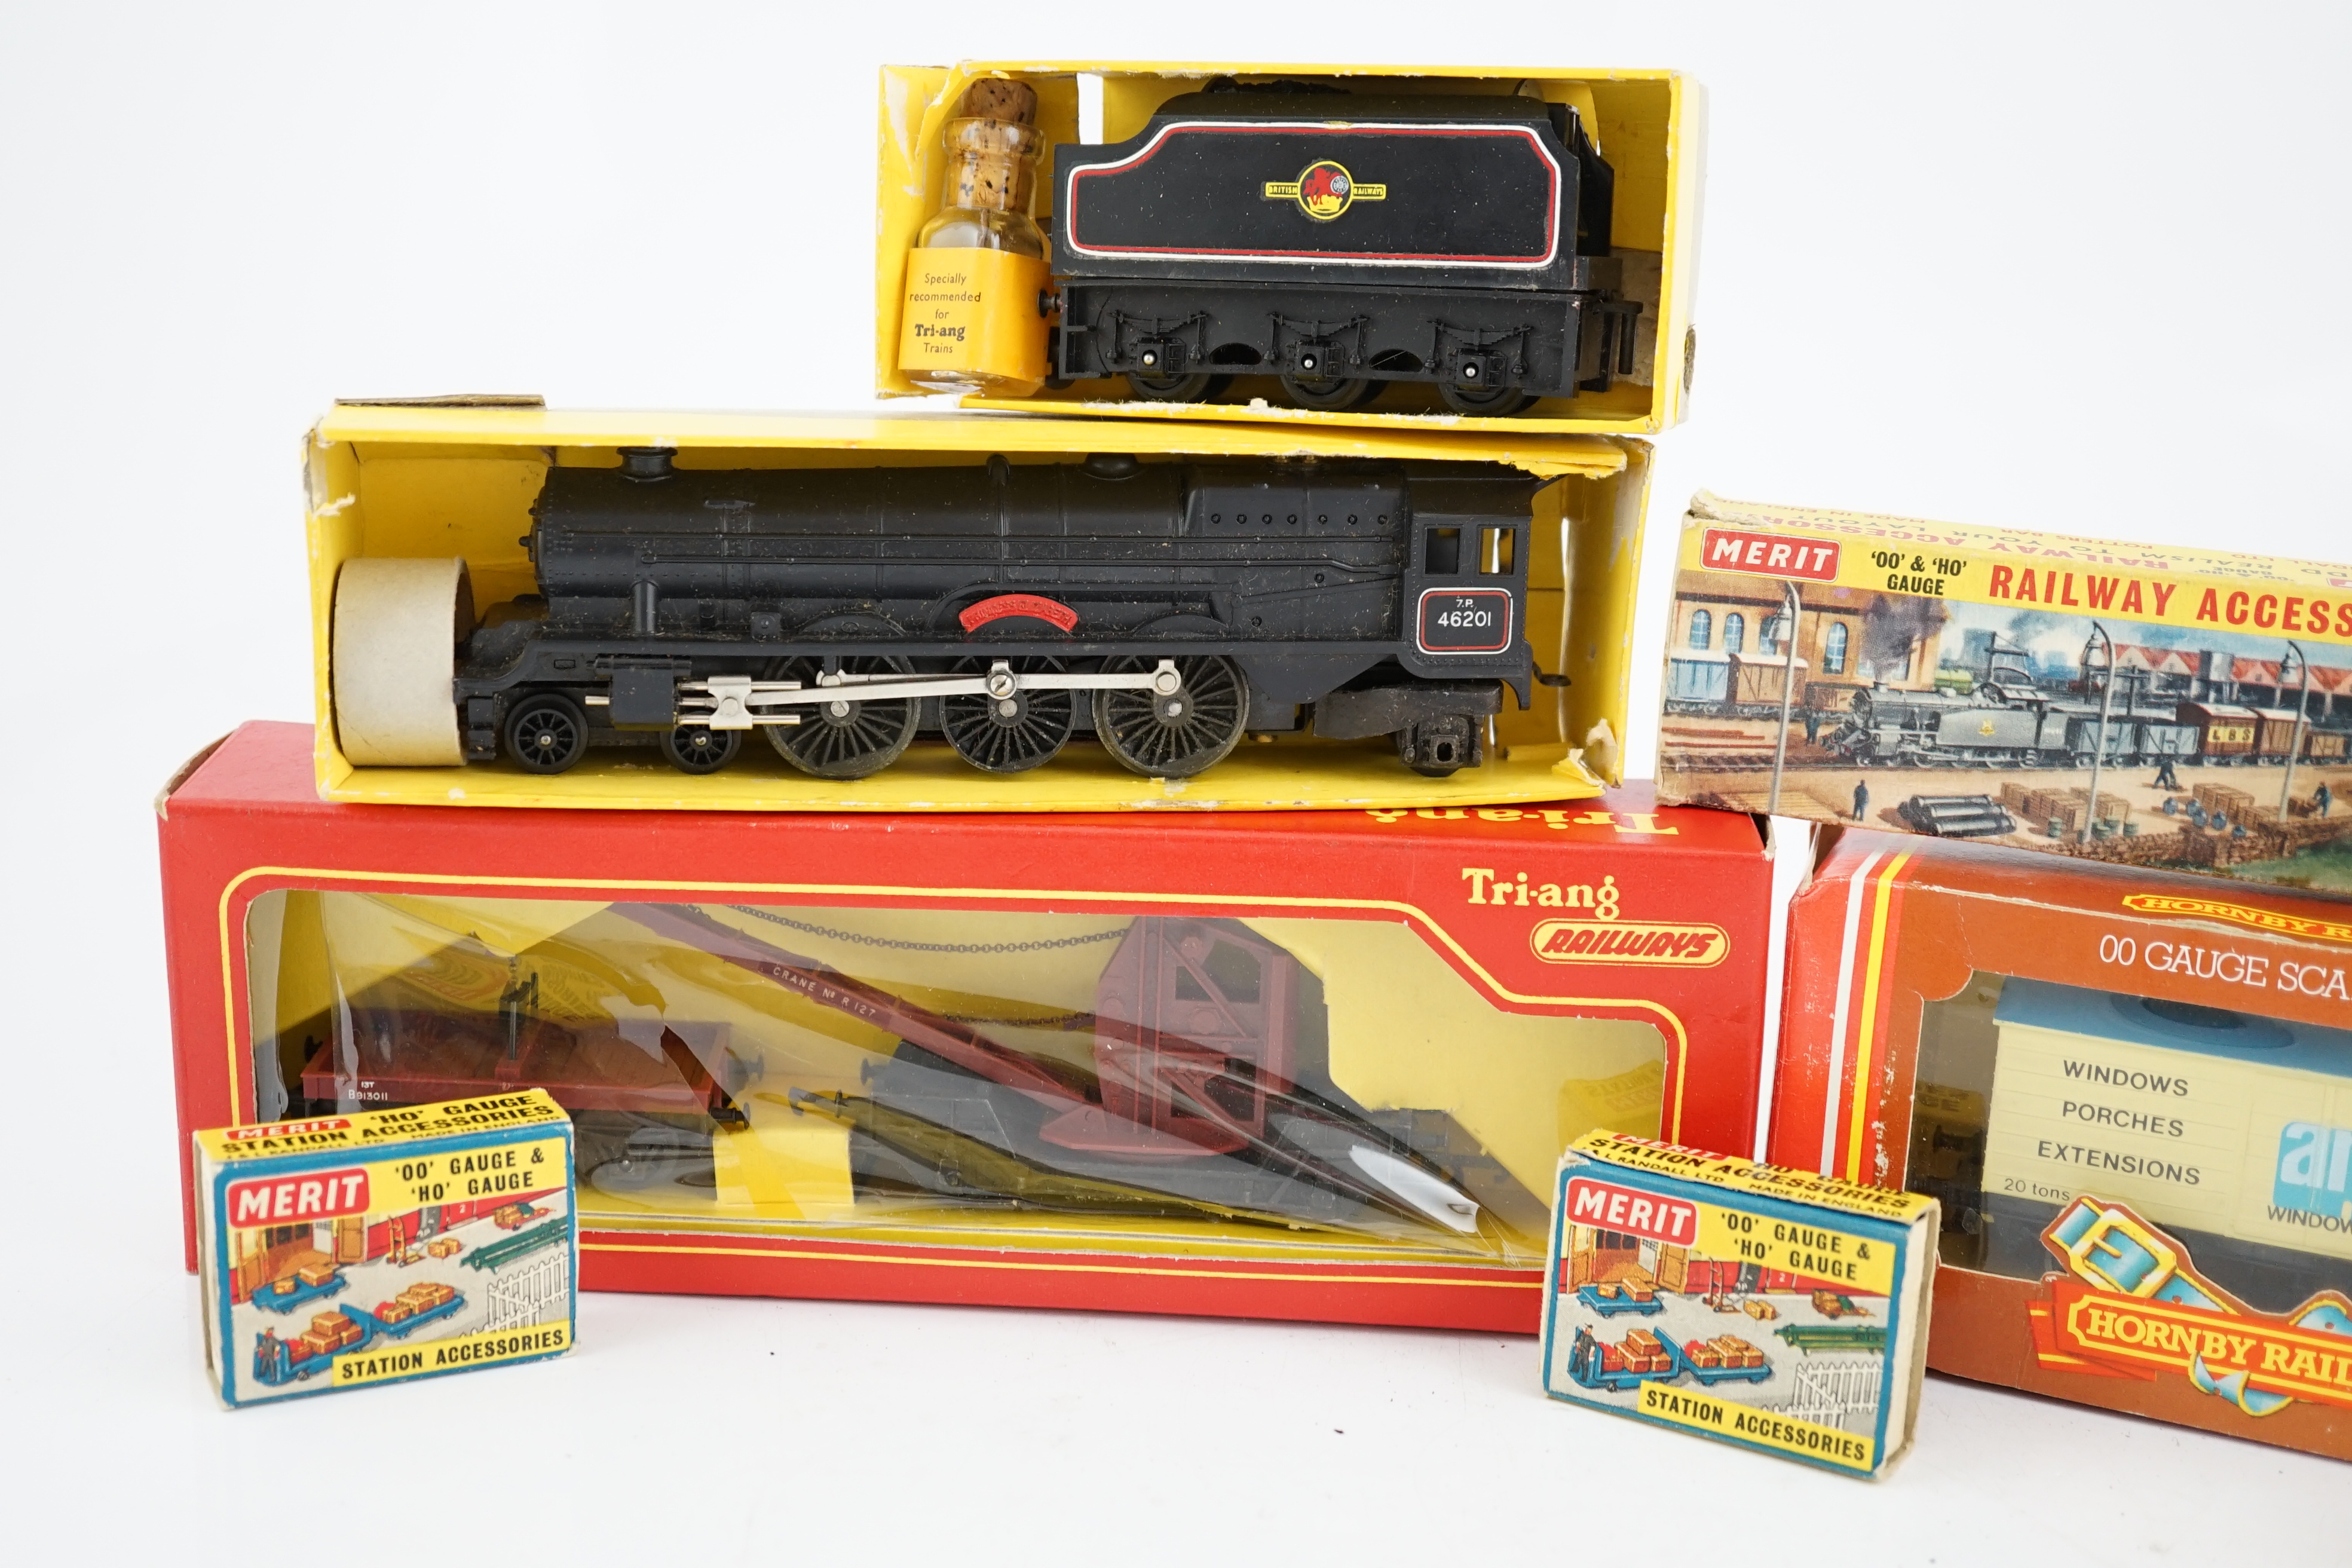 A collection of mostly Tri-ang Railways 00 gauge model railway, including three locomotives; a BR saddle tank loco (R153), a BR Princess Royal class 4-6-0 and an S.R. Suburban Motor Coach driving unit